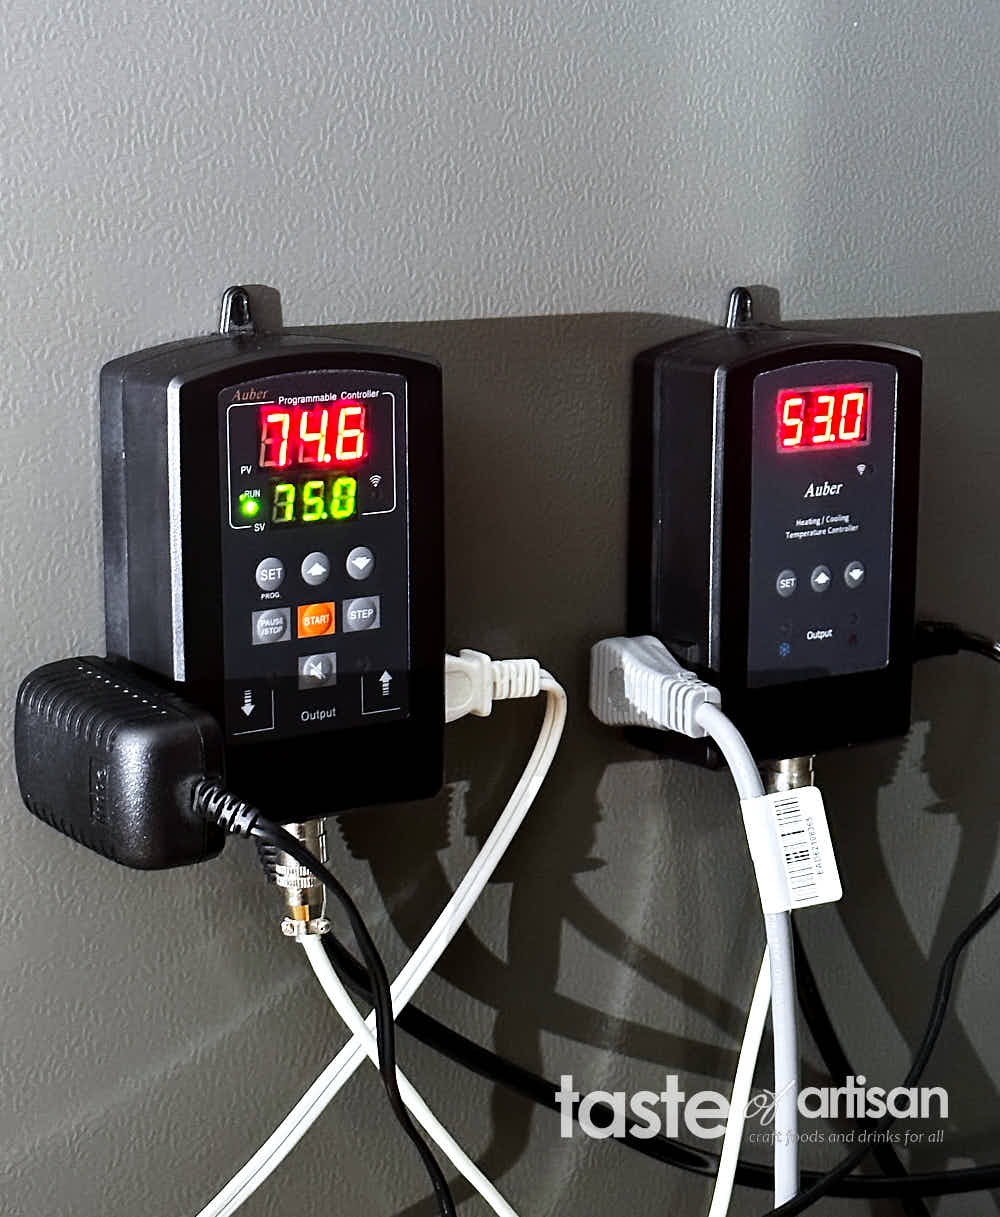 Auber Instruments humidity and temperature controllers for the advanced meat curing chamber.